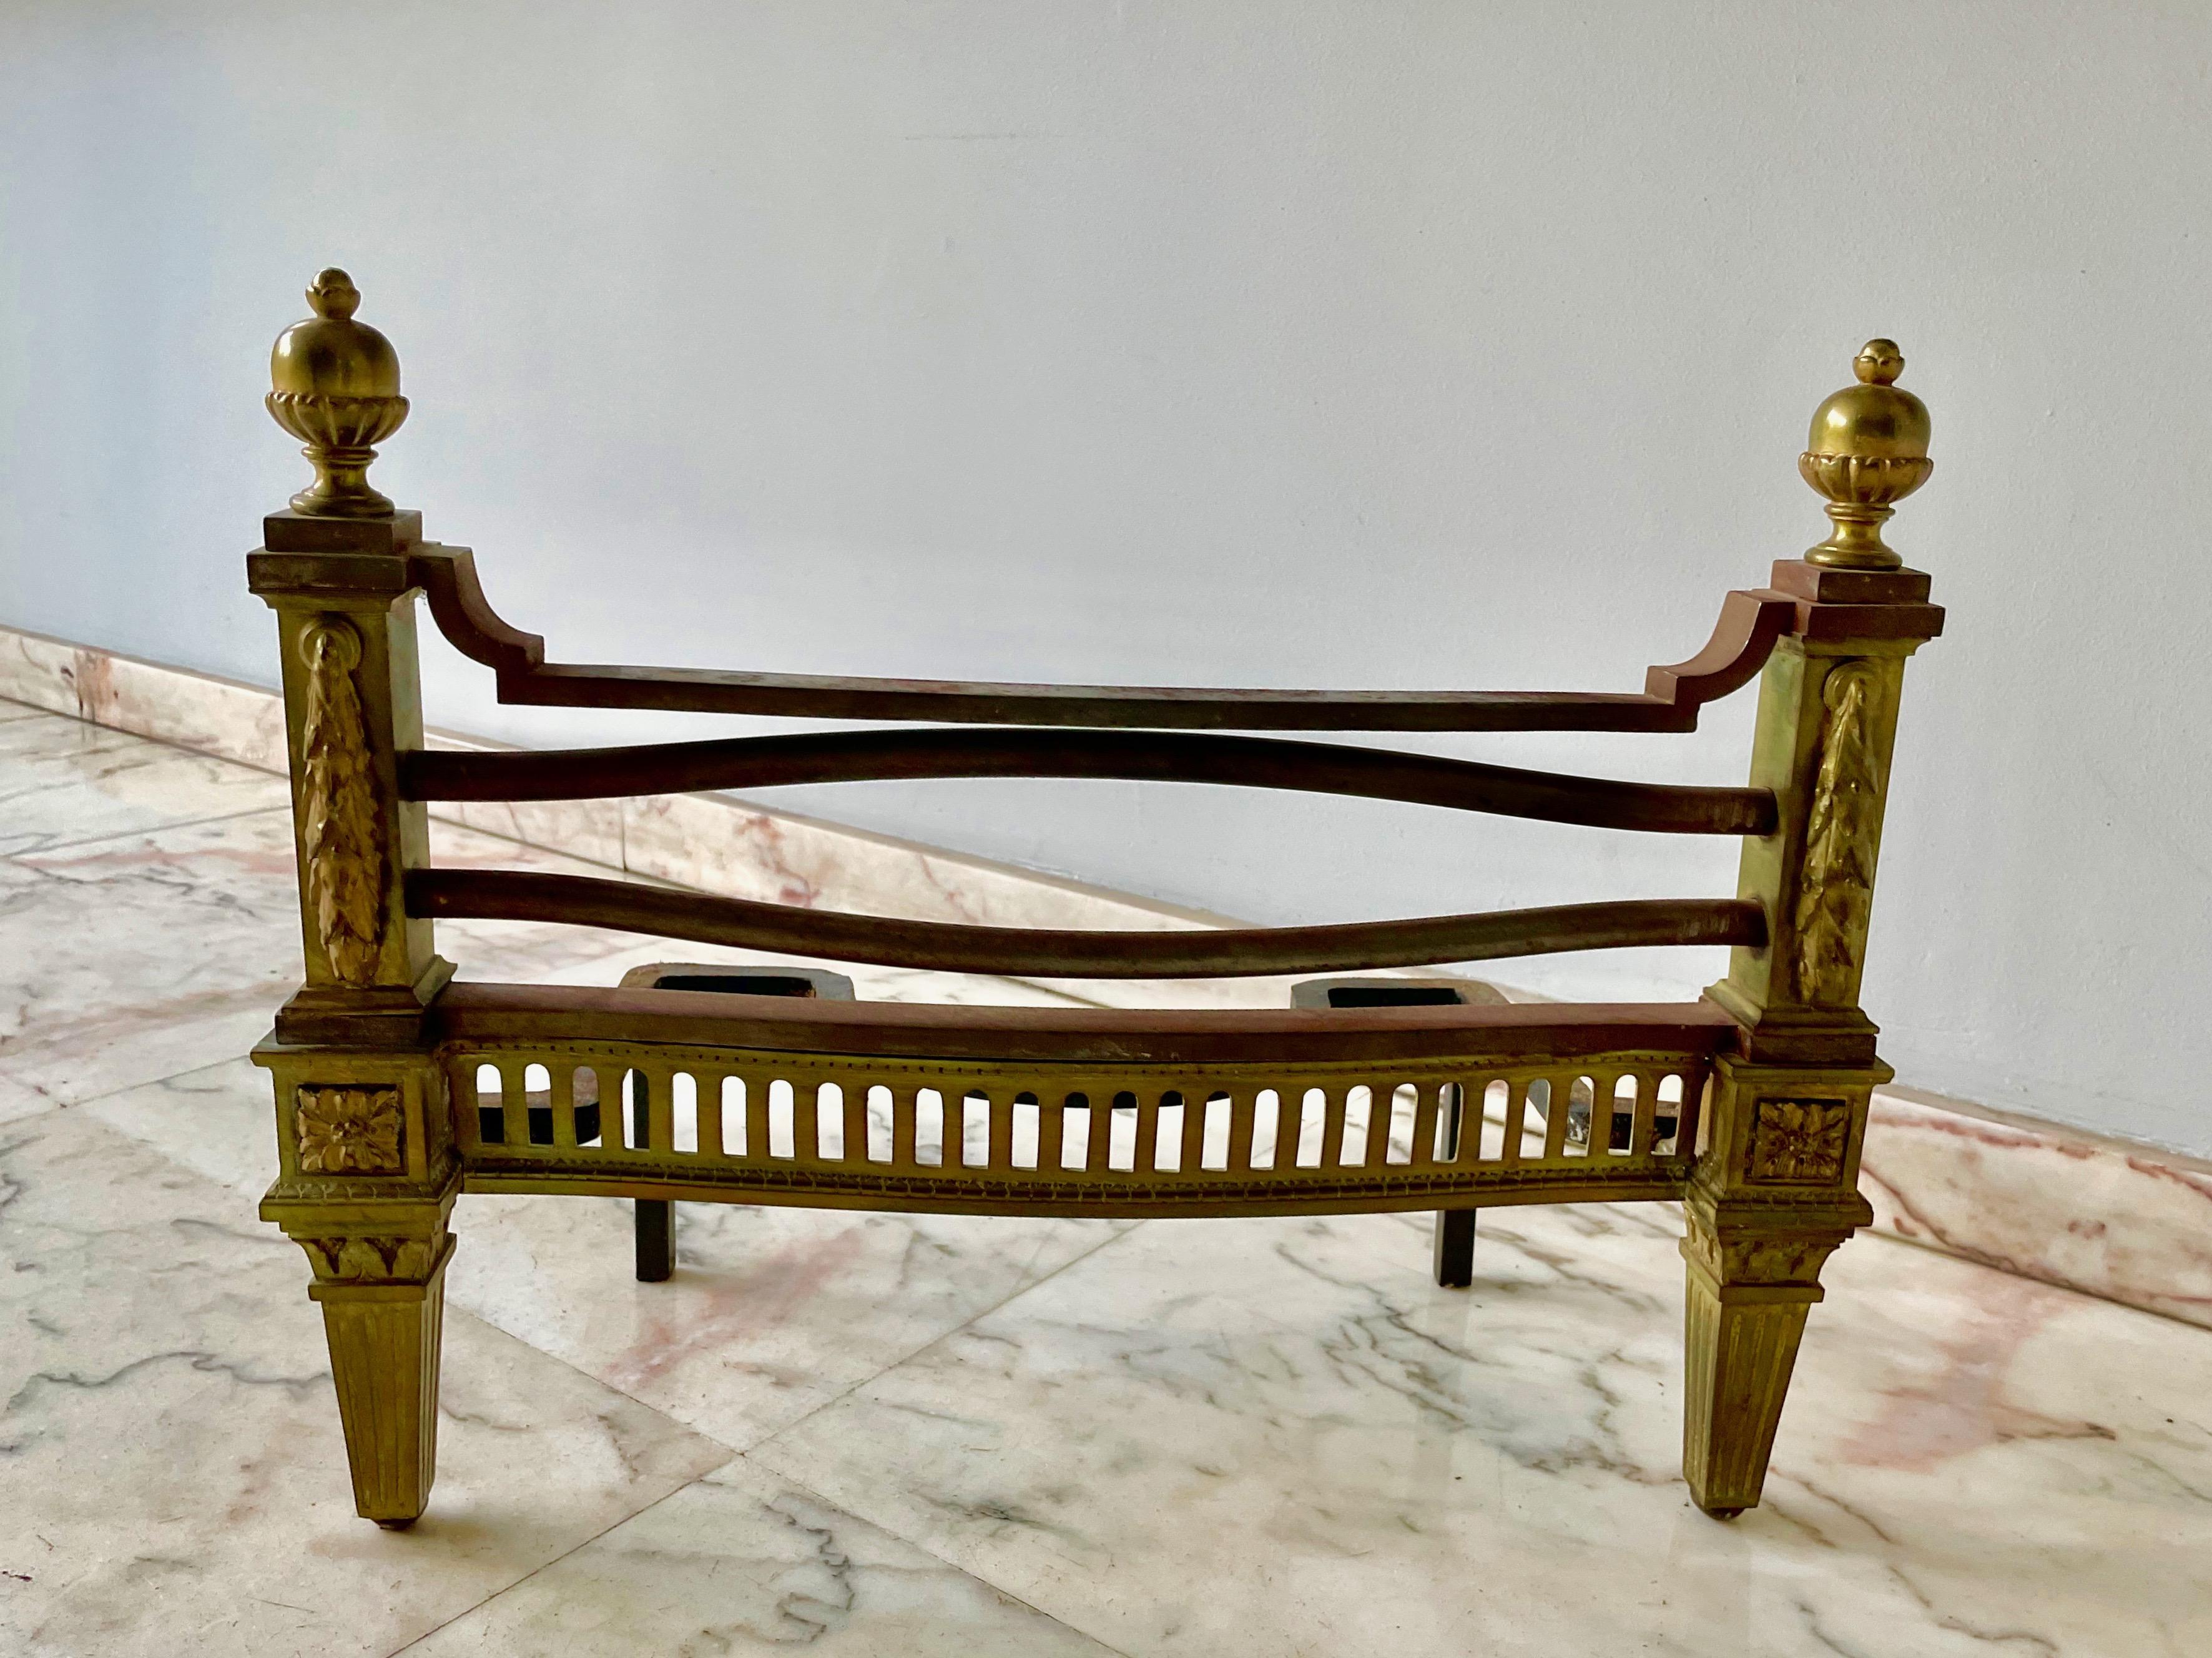 Elegant Mid-19th Century Stamped Gilt Bronze Andirons, France, Around 1850 For Sale 2